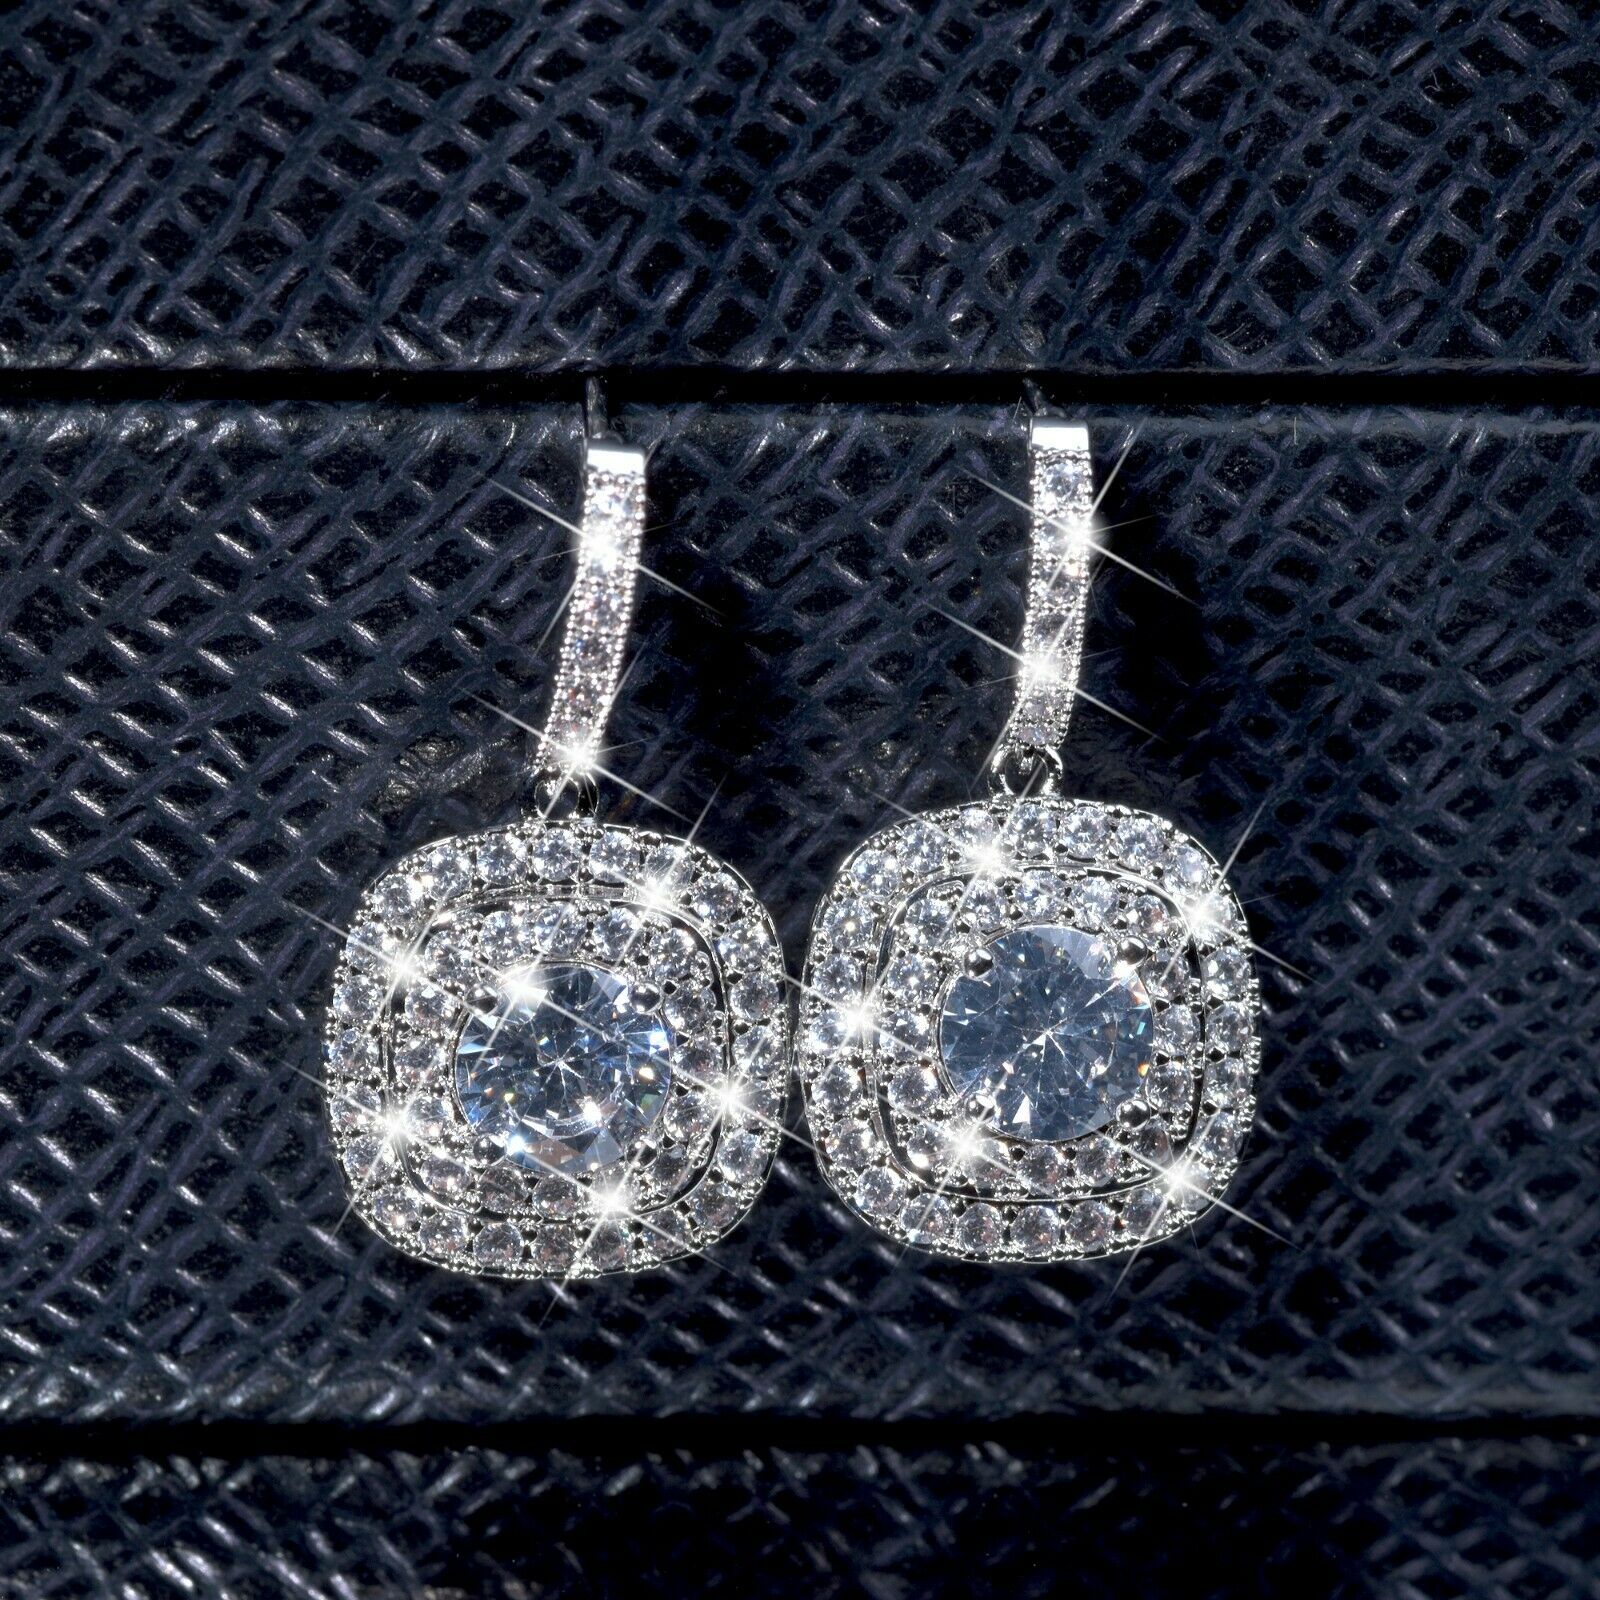 18k white Gold filled stud made with Swarovski crystal luxury dangle drop earrings